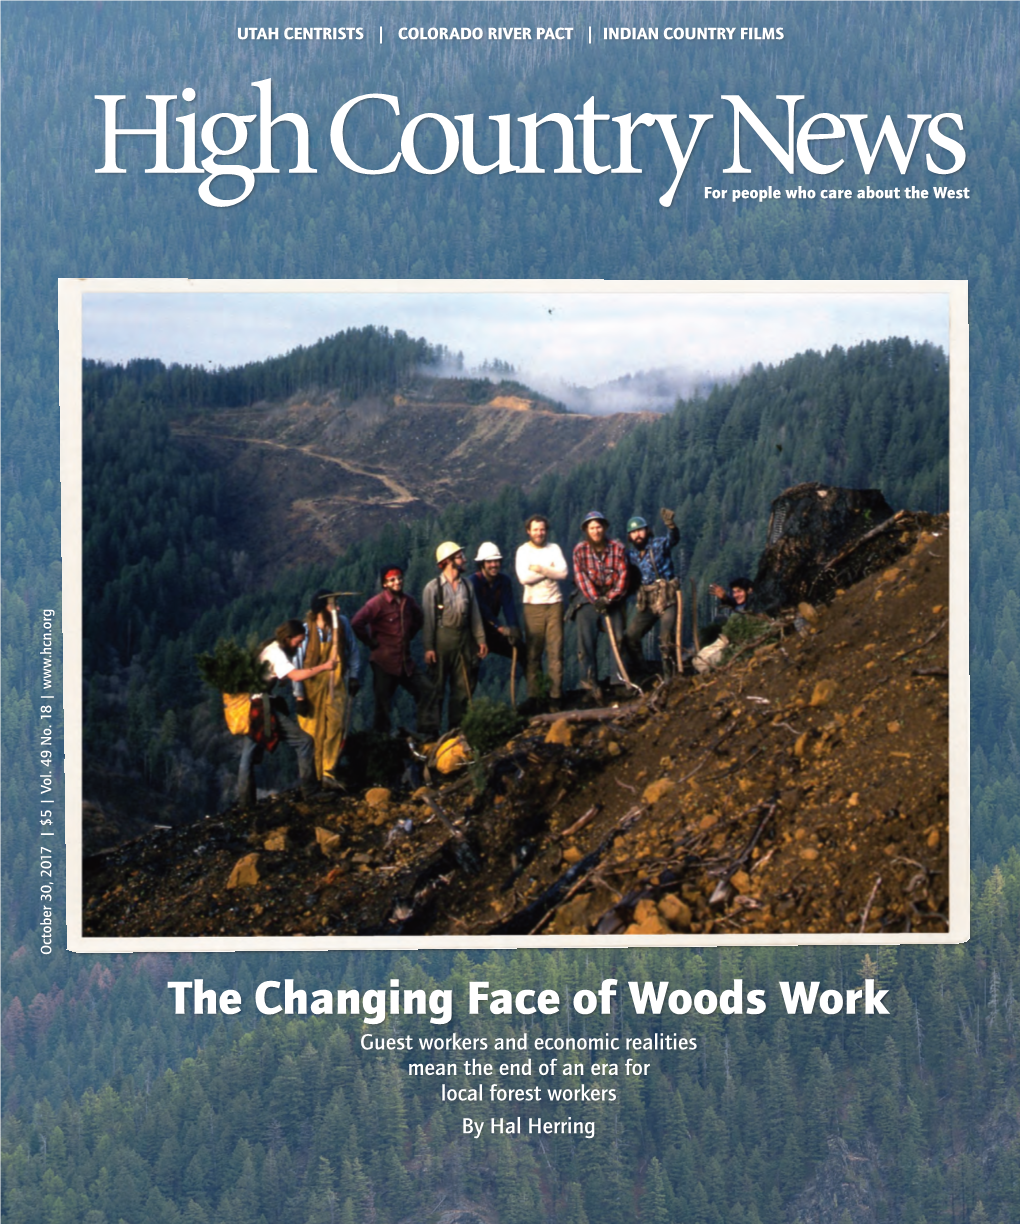 The Changing Face of Woods Work Guest Workers and Economic Realities Mean the End of an Era for Local Forest Workers by Hal Herring CONTENTS